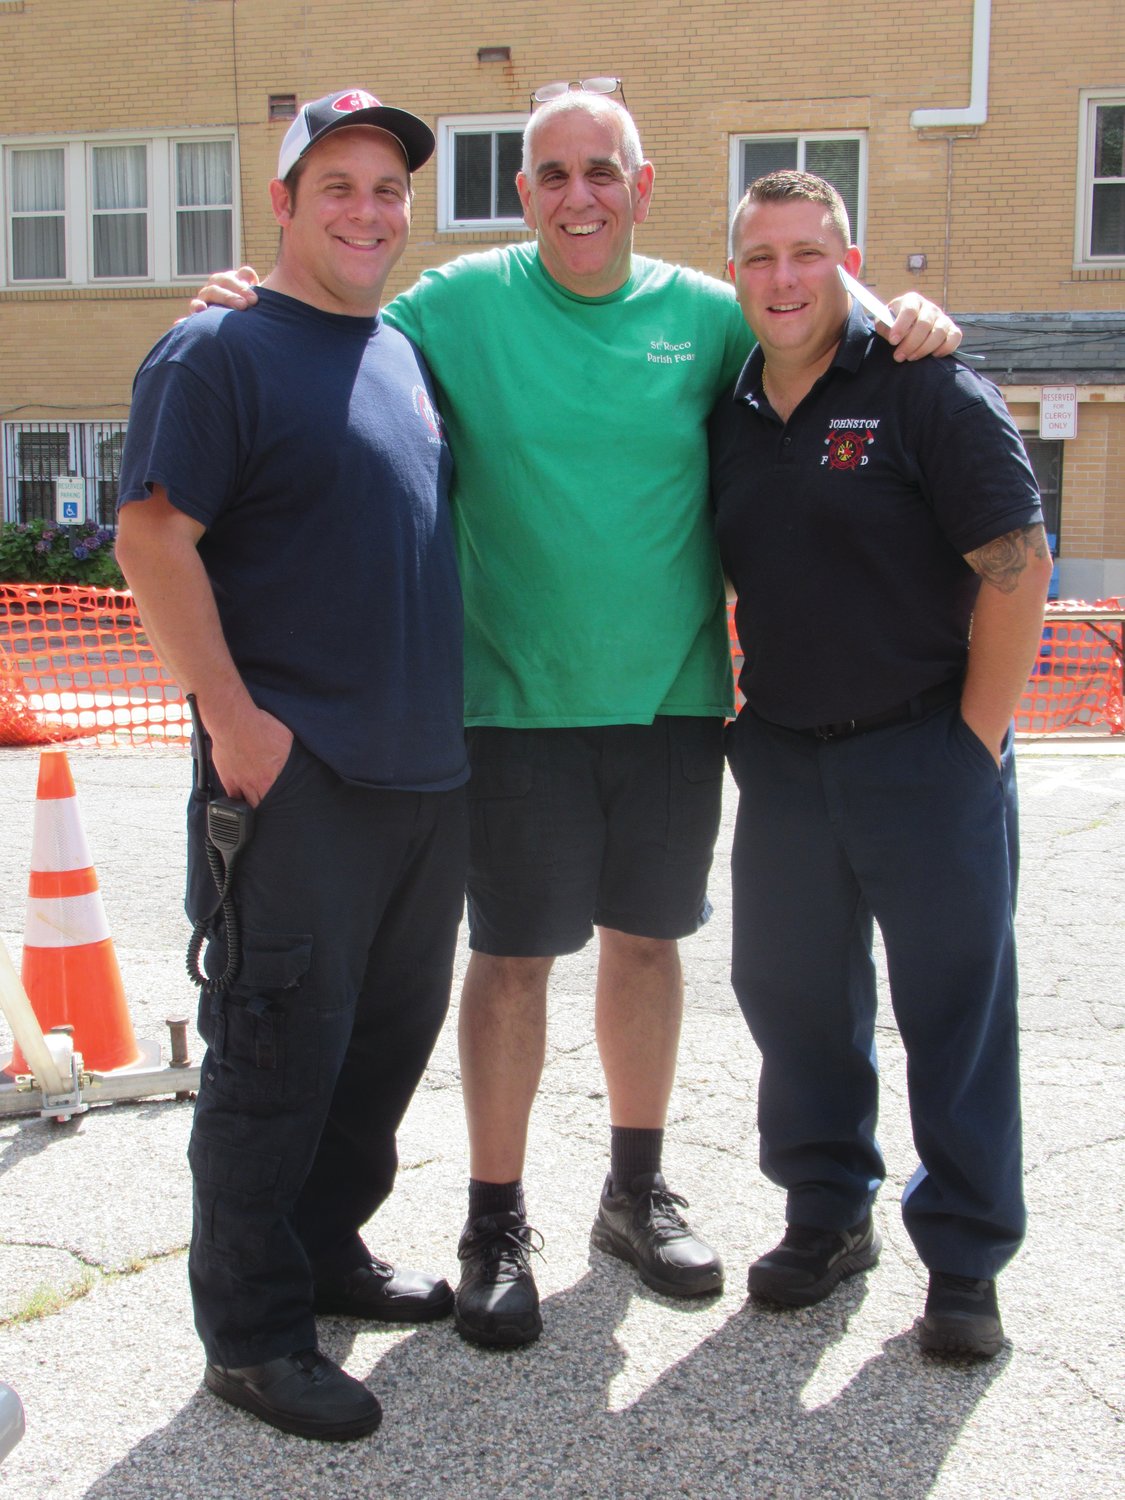 SPECIAL STAFF: Saint Rocco’s Co-Chairman Richard is joined by Johnston Firefighters Mark Livingston (left) and Anthon Colella II who were on duty Sunday in case of an emergency.